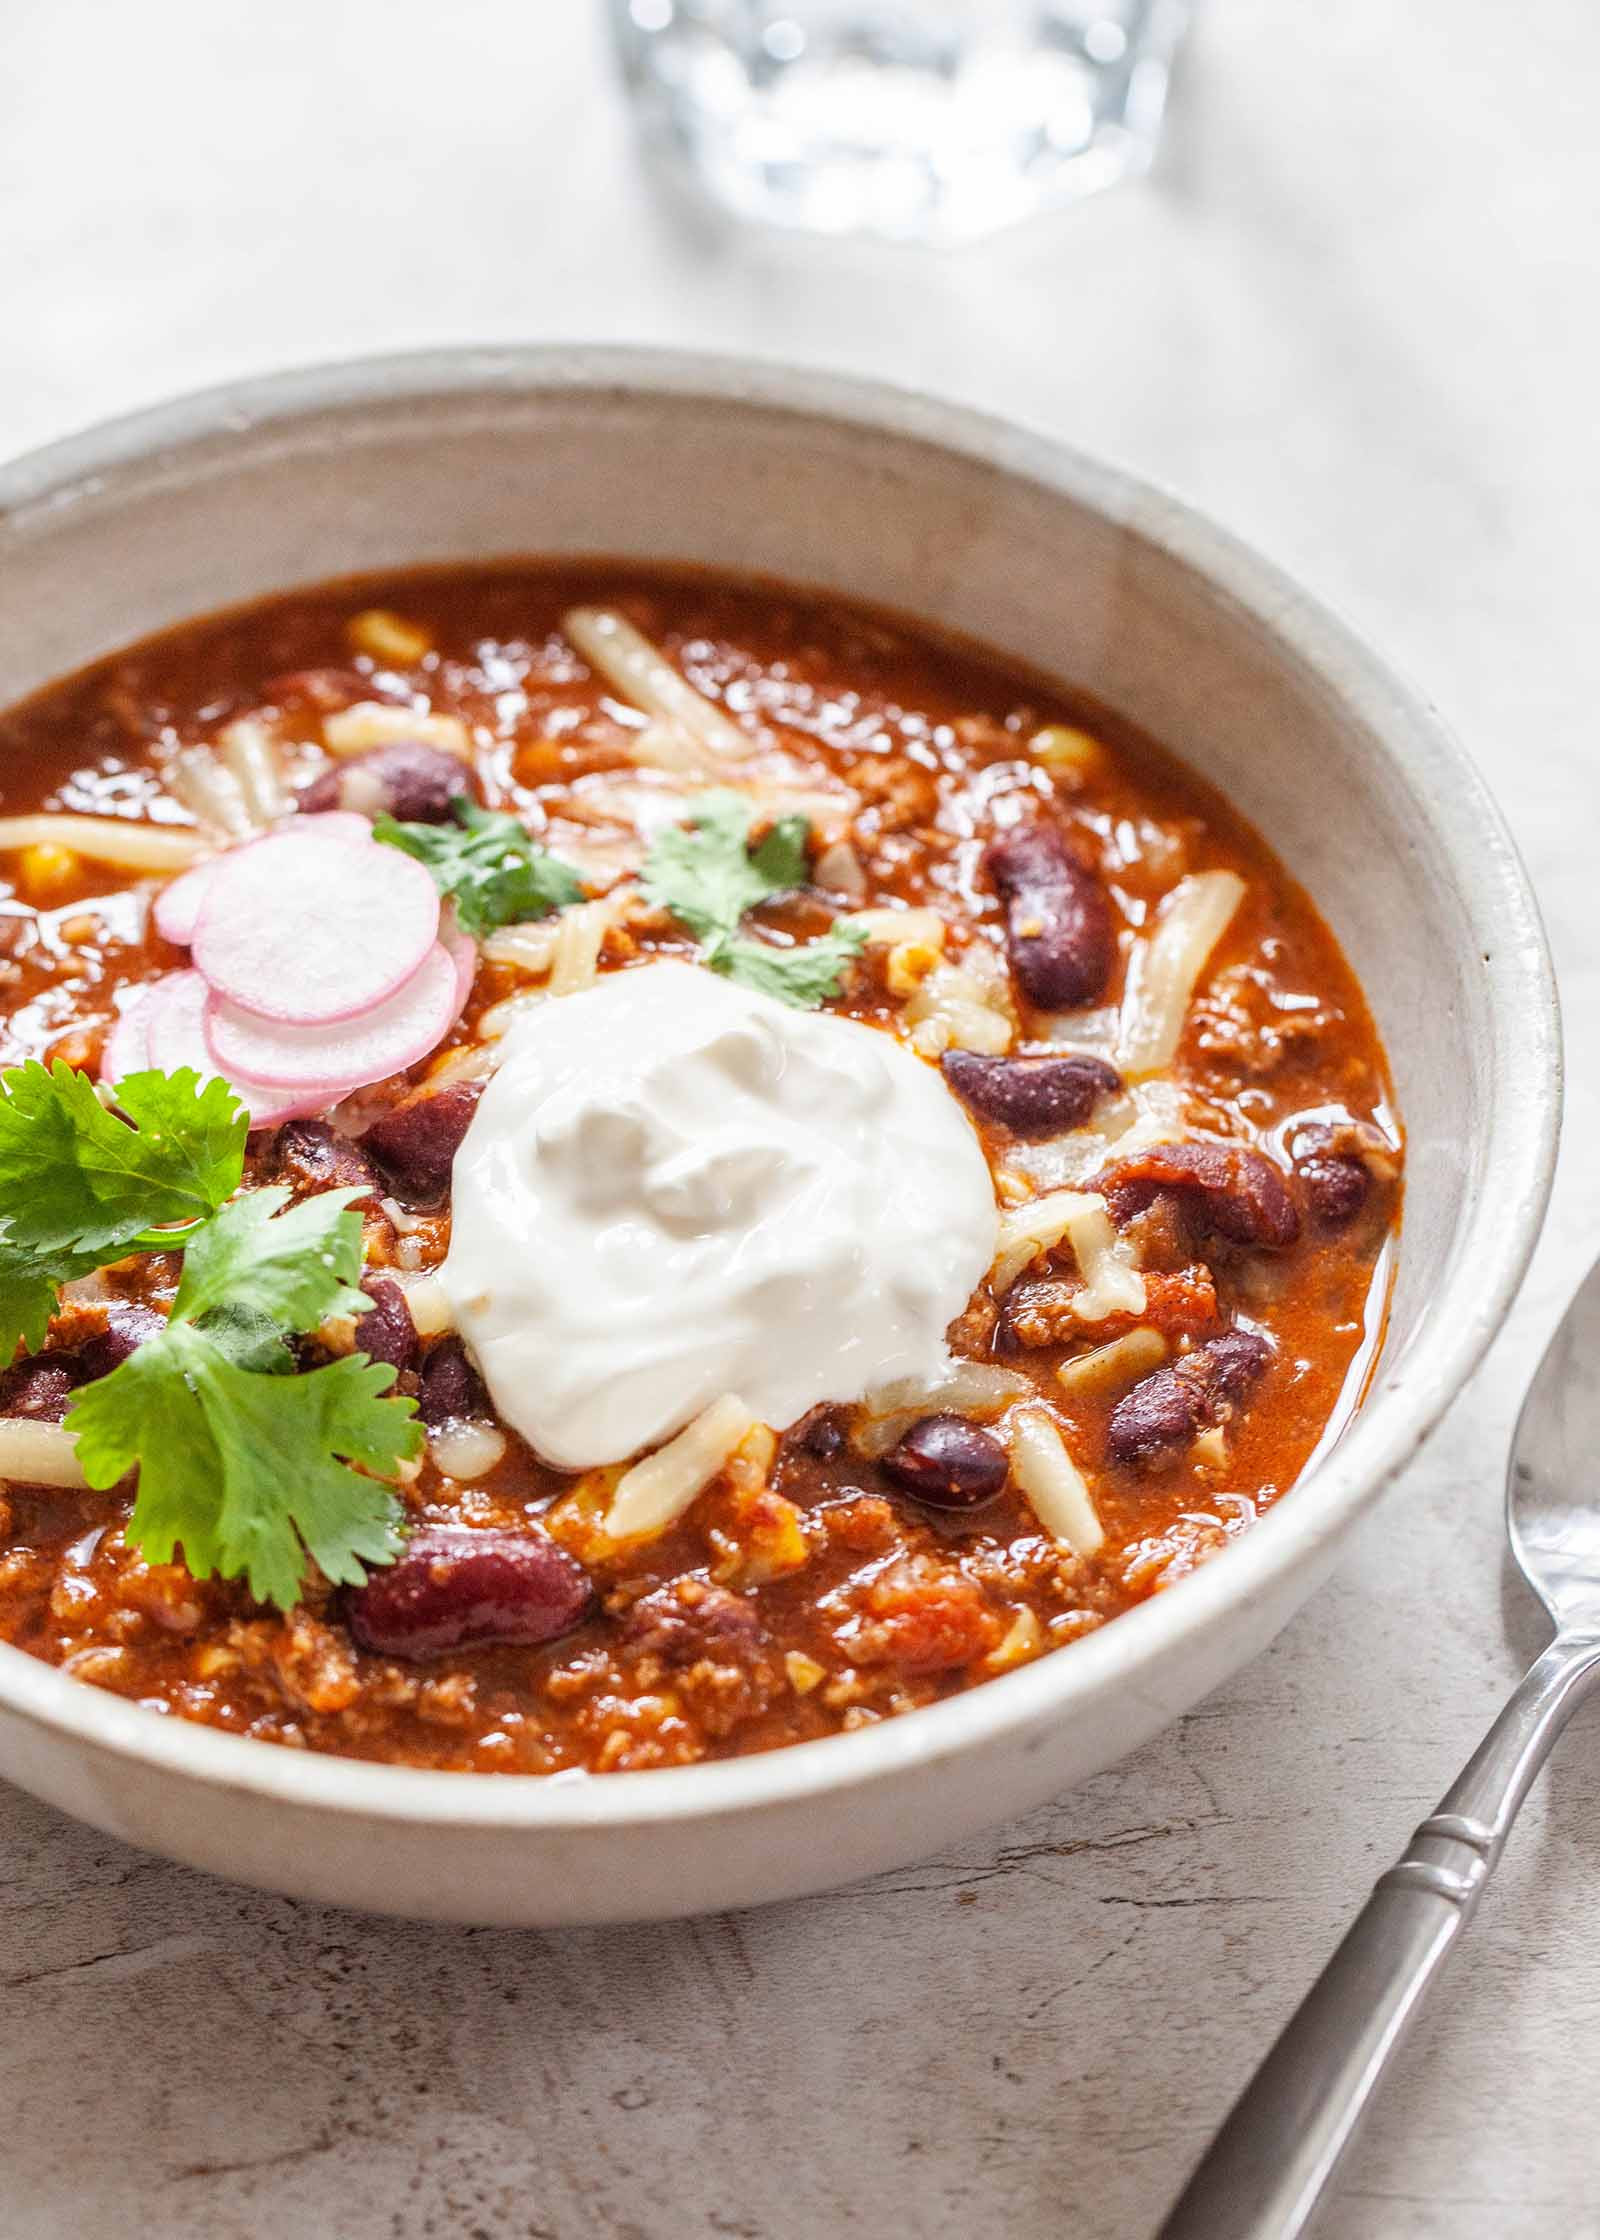 Chili Recipes With Beef
 Best Beef Chili Recipe